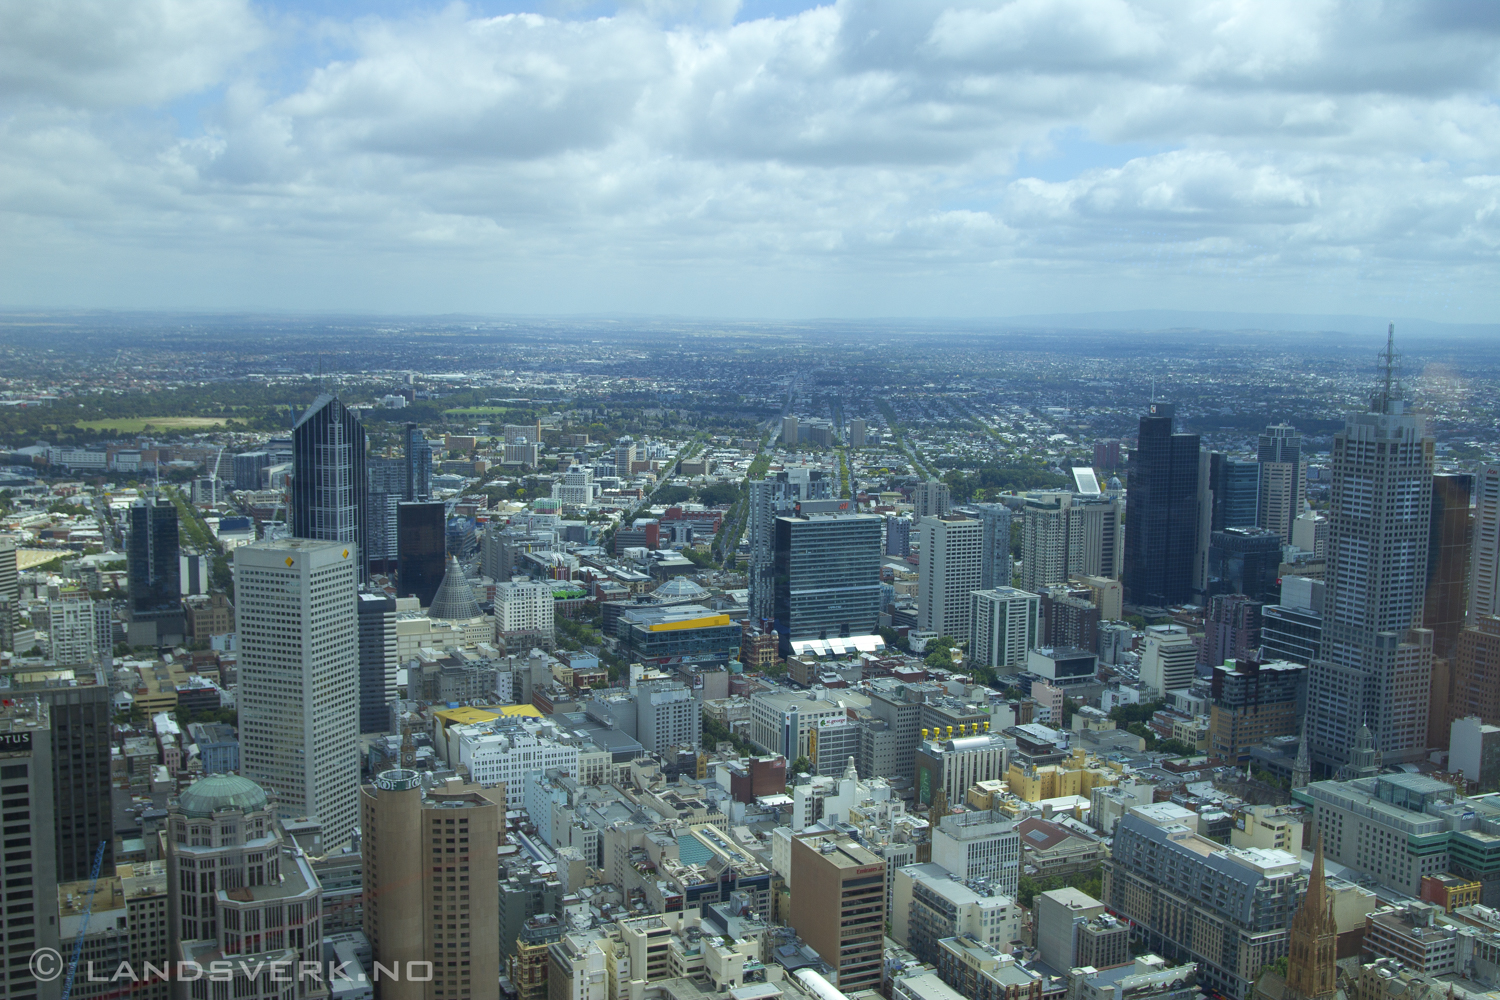 The view from the shitty "Eureka Skydeck", without open air and anti-reflective windows. Melbourne, Victoria. 

(Canon EOS 550D / Sigma 18-50mm F2.8)